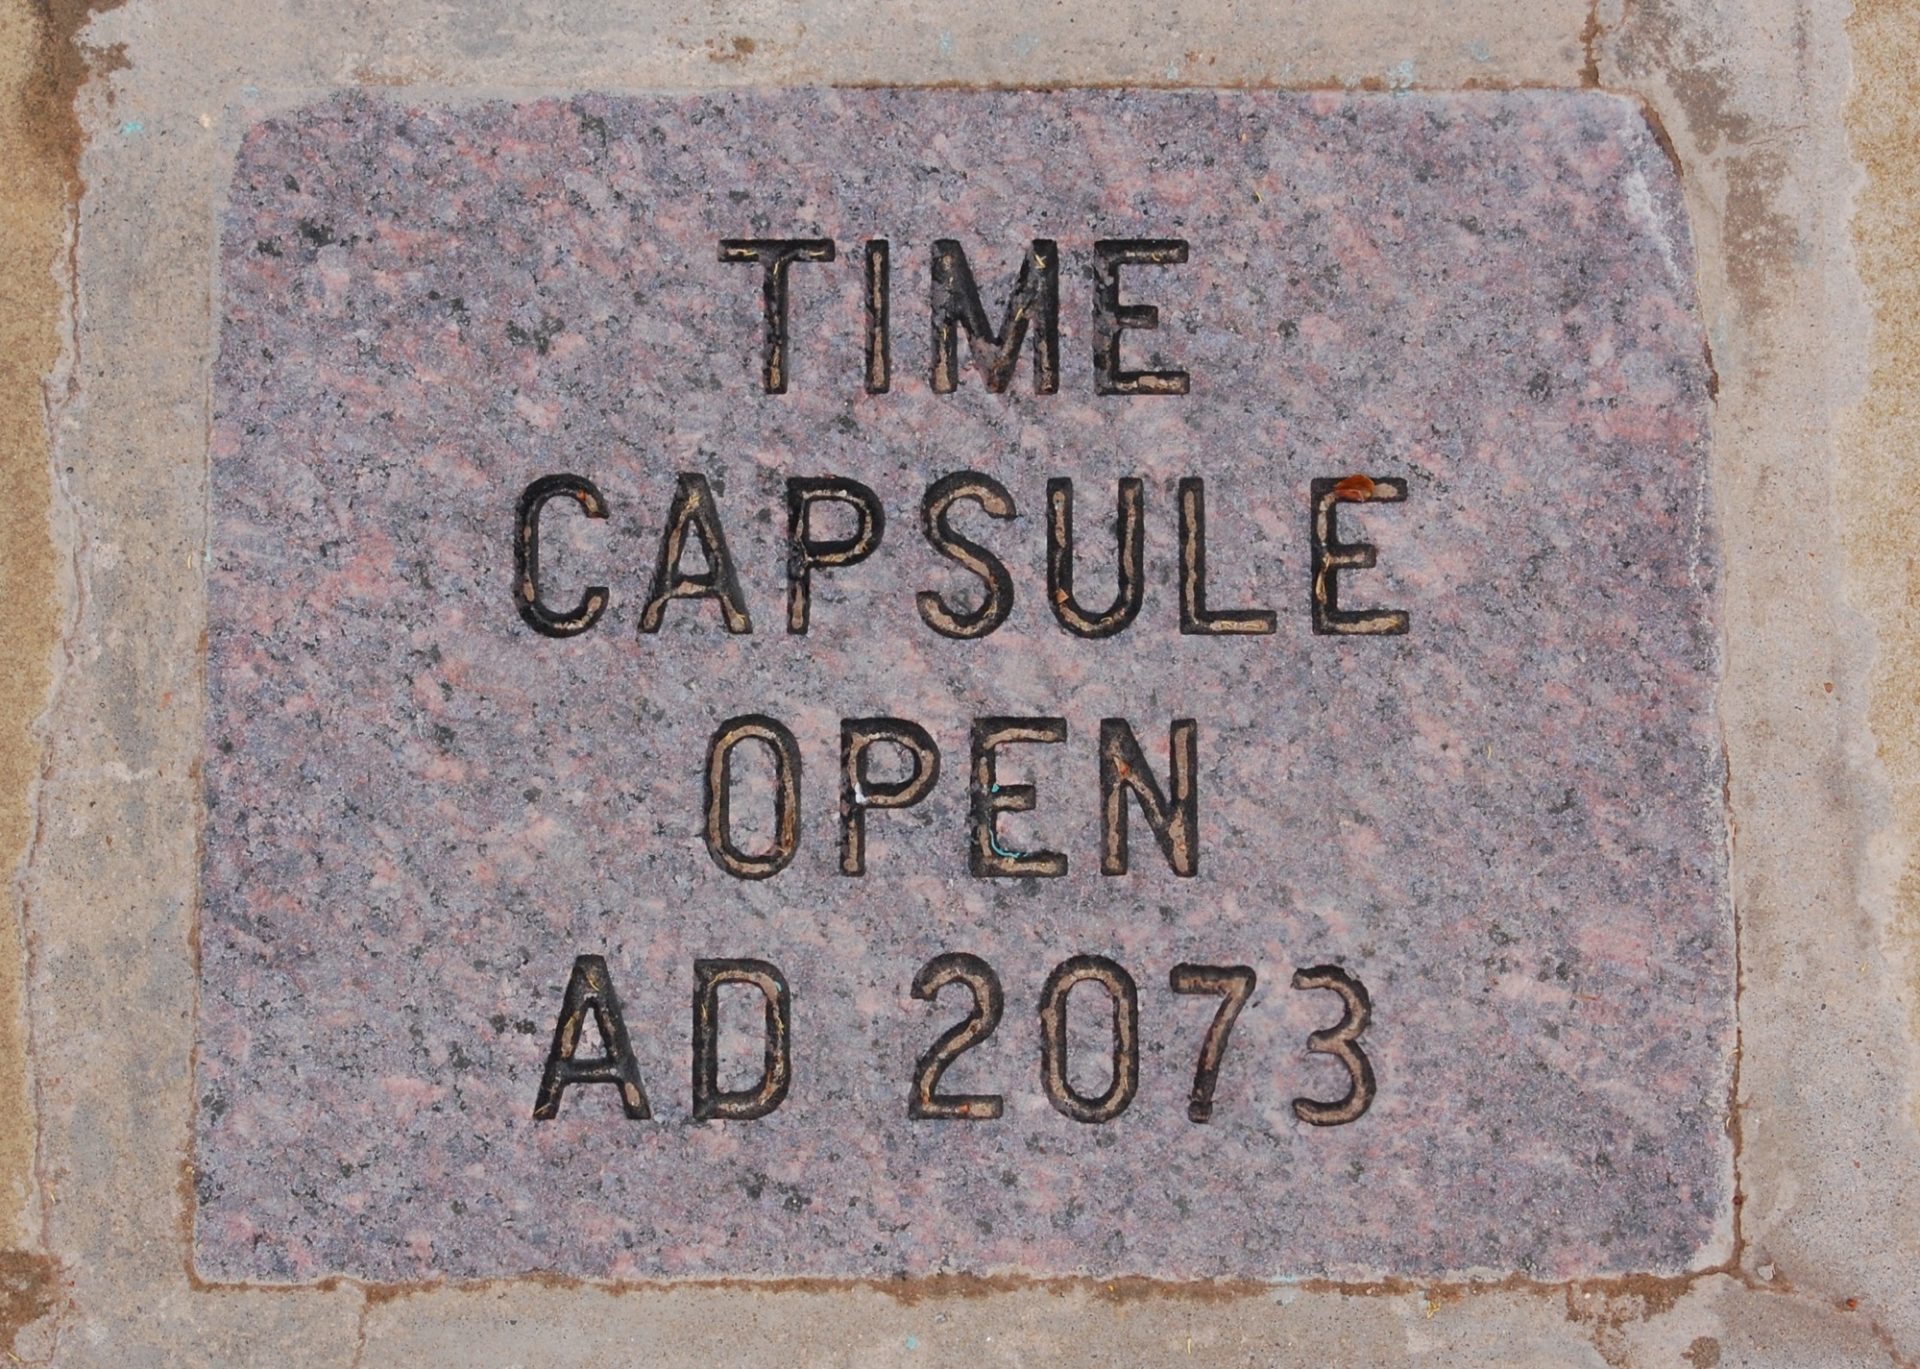 The top of a time capsule with the words TIME CAPSULE OPEN AD 2073 engraved into it